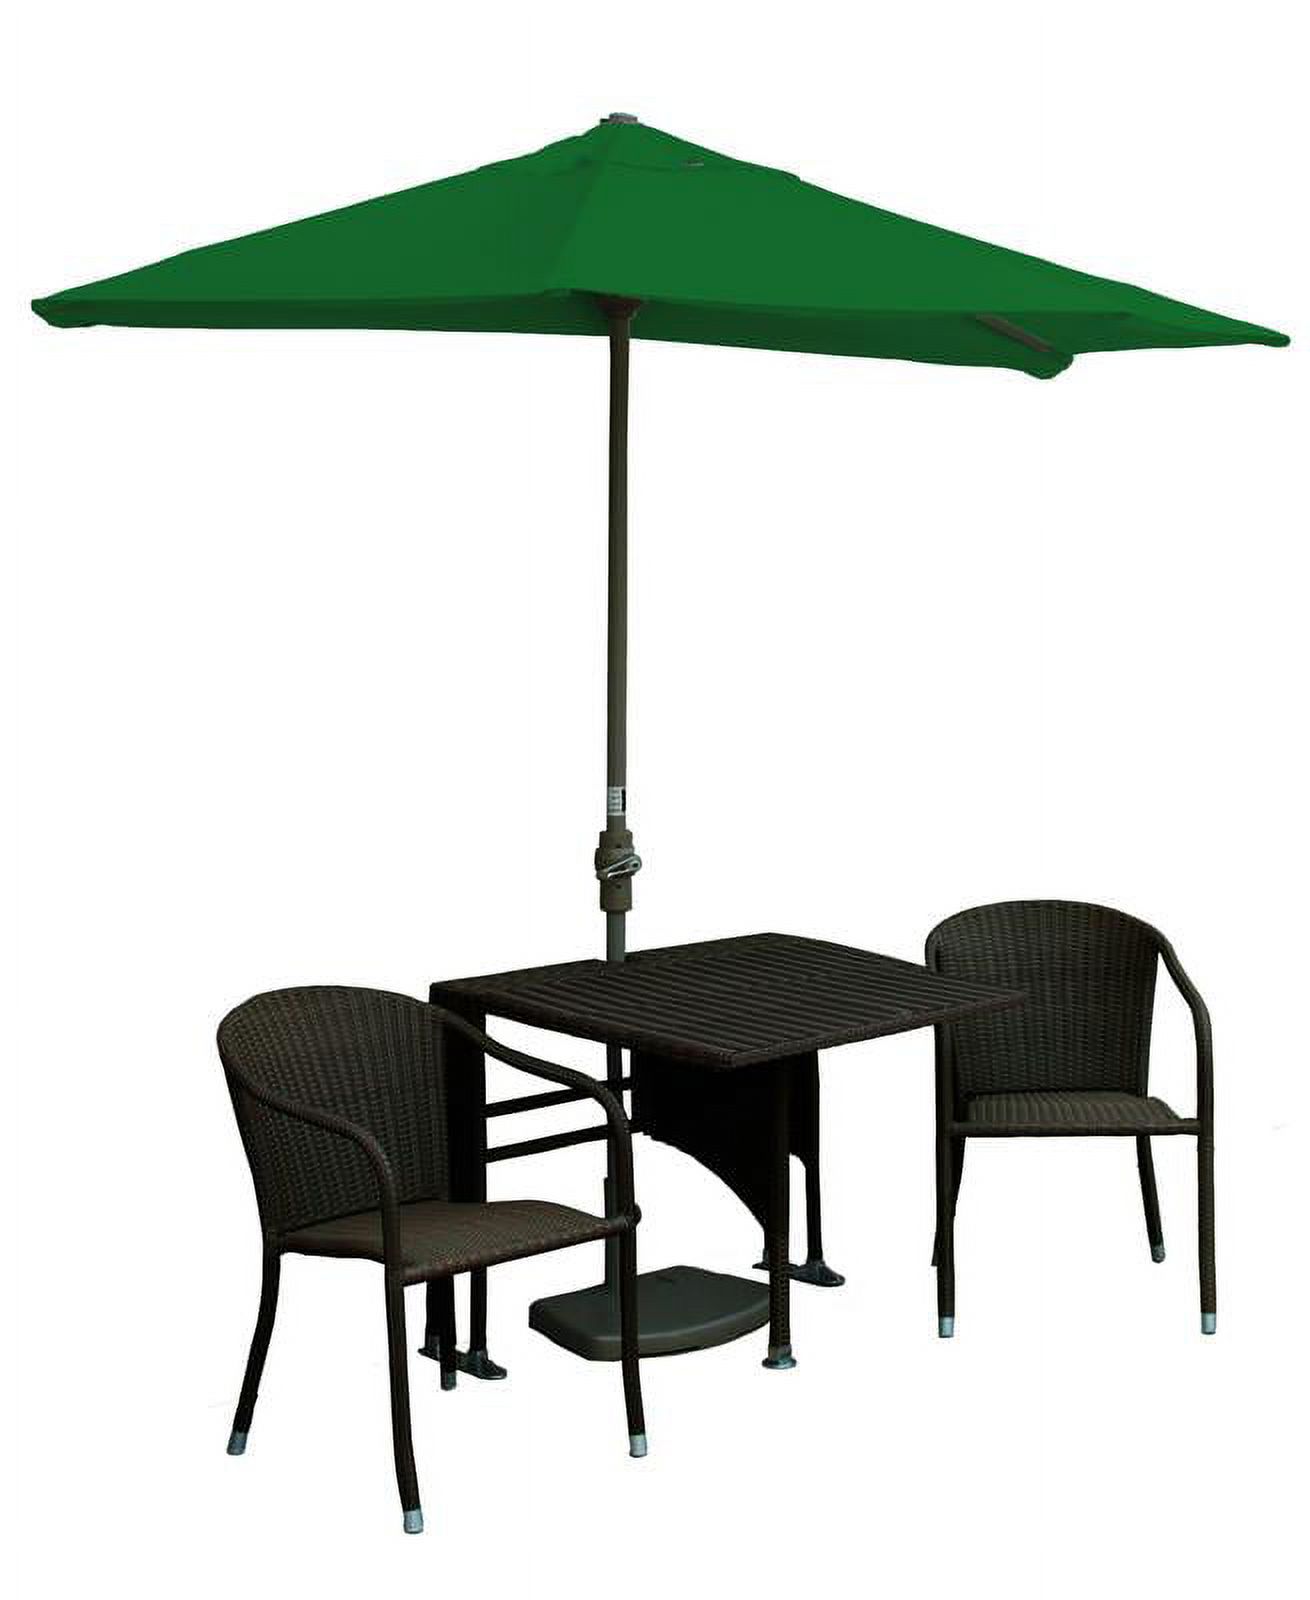 Blue Star Group Terrace Mates Daniella All-Weather Wicker Java Color Table Set w/ 7.5'-Wide OFF-THE-WALL BRELLA - Forest Green Sunbrella Canopy - image 1 of 9